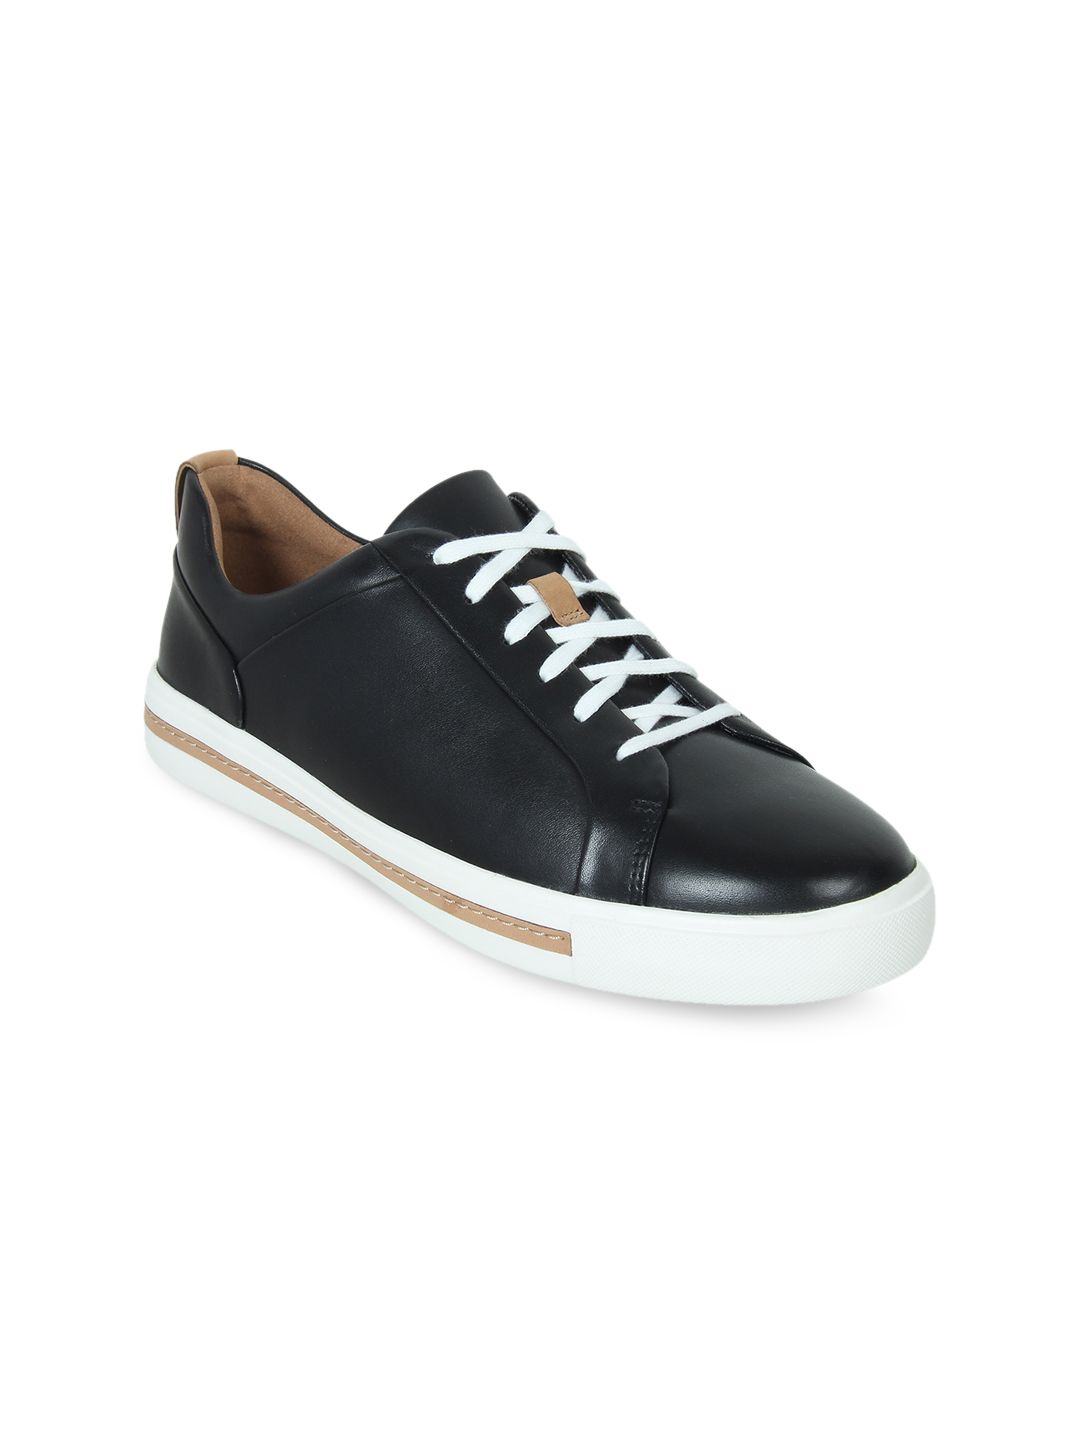 Clarks Women Black Leather Sneakers Price in India